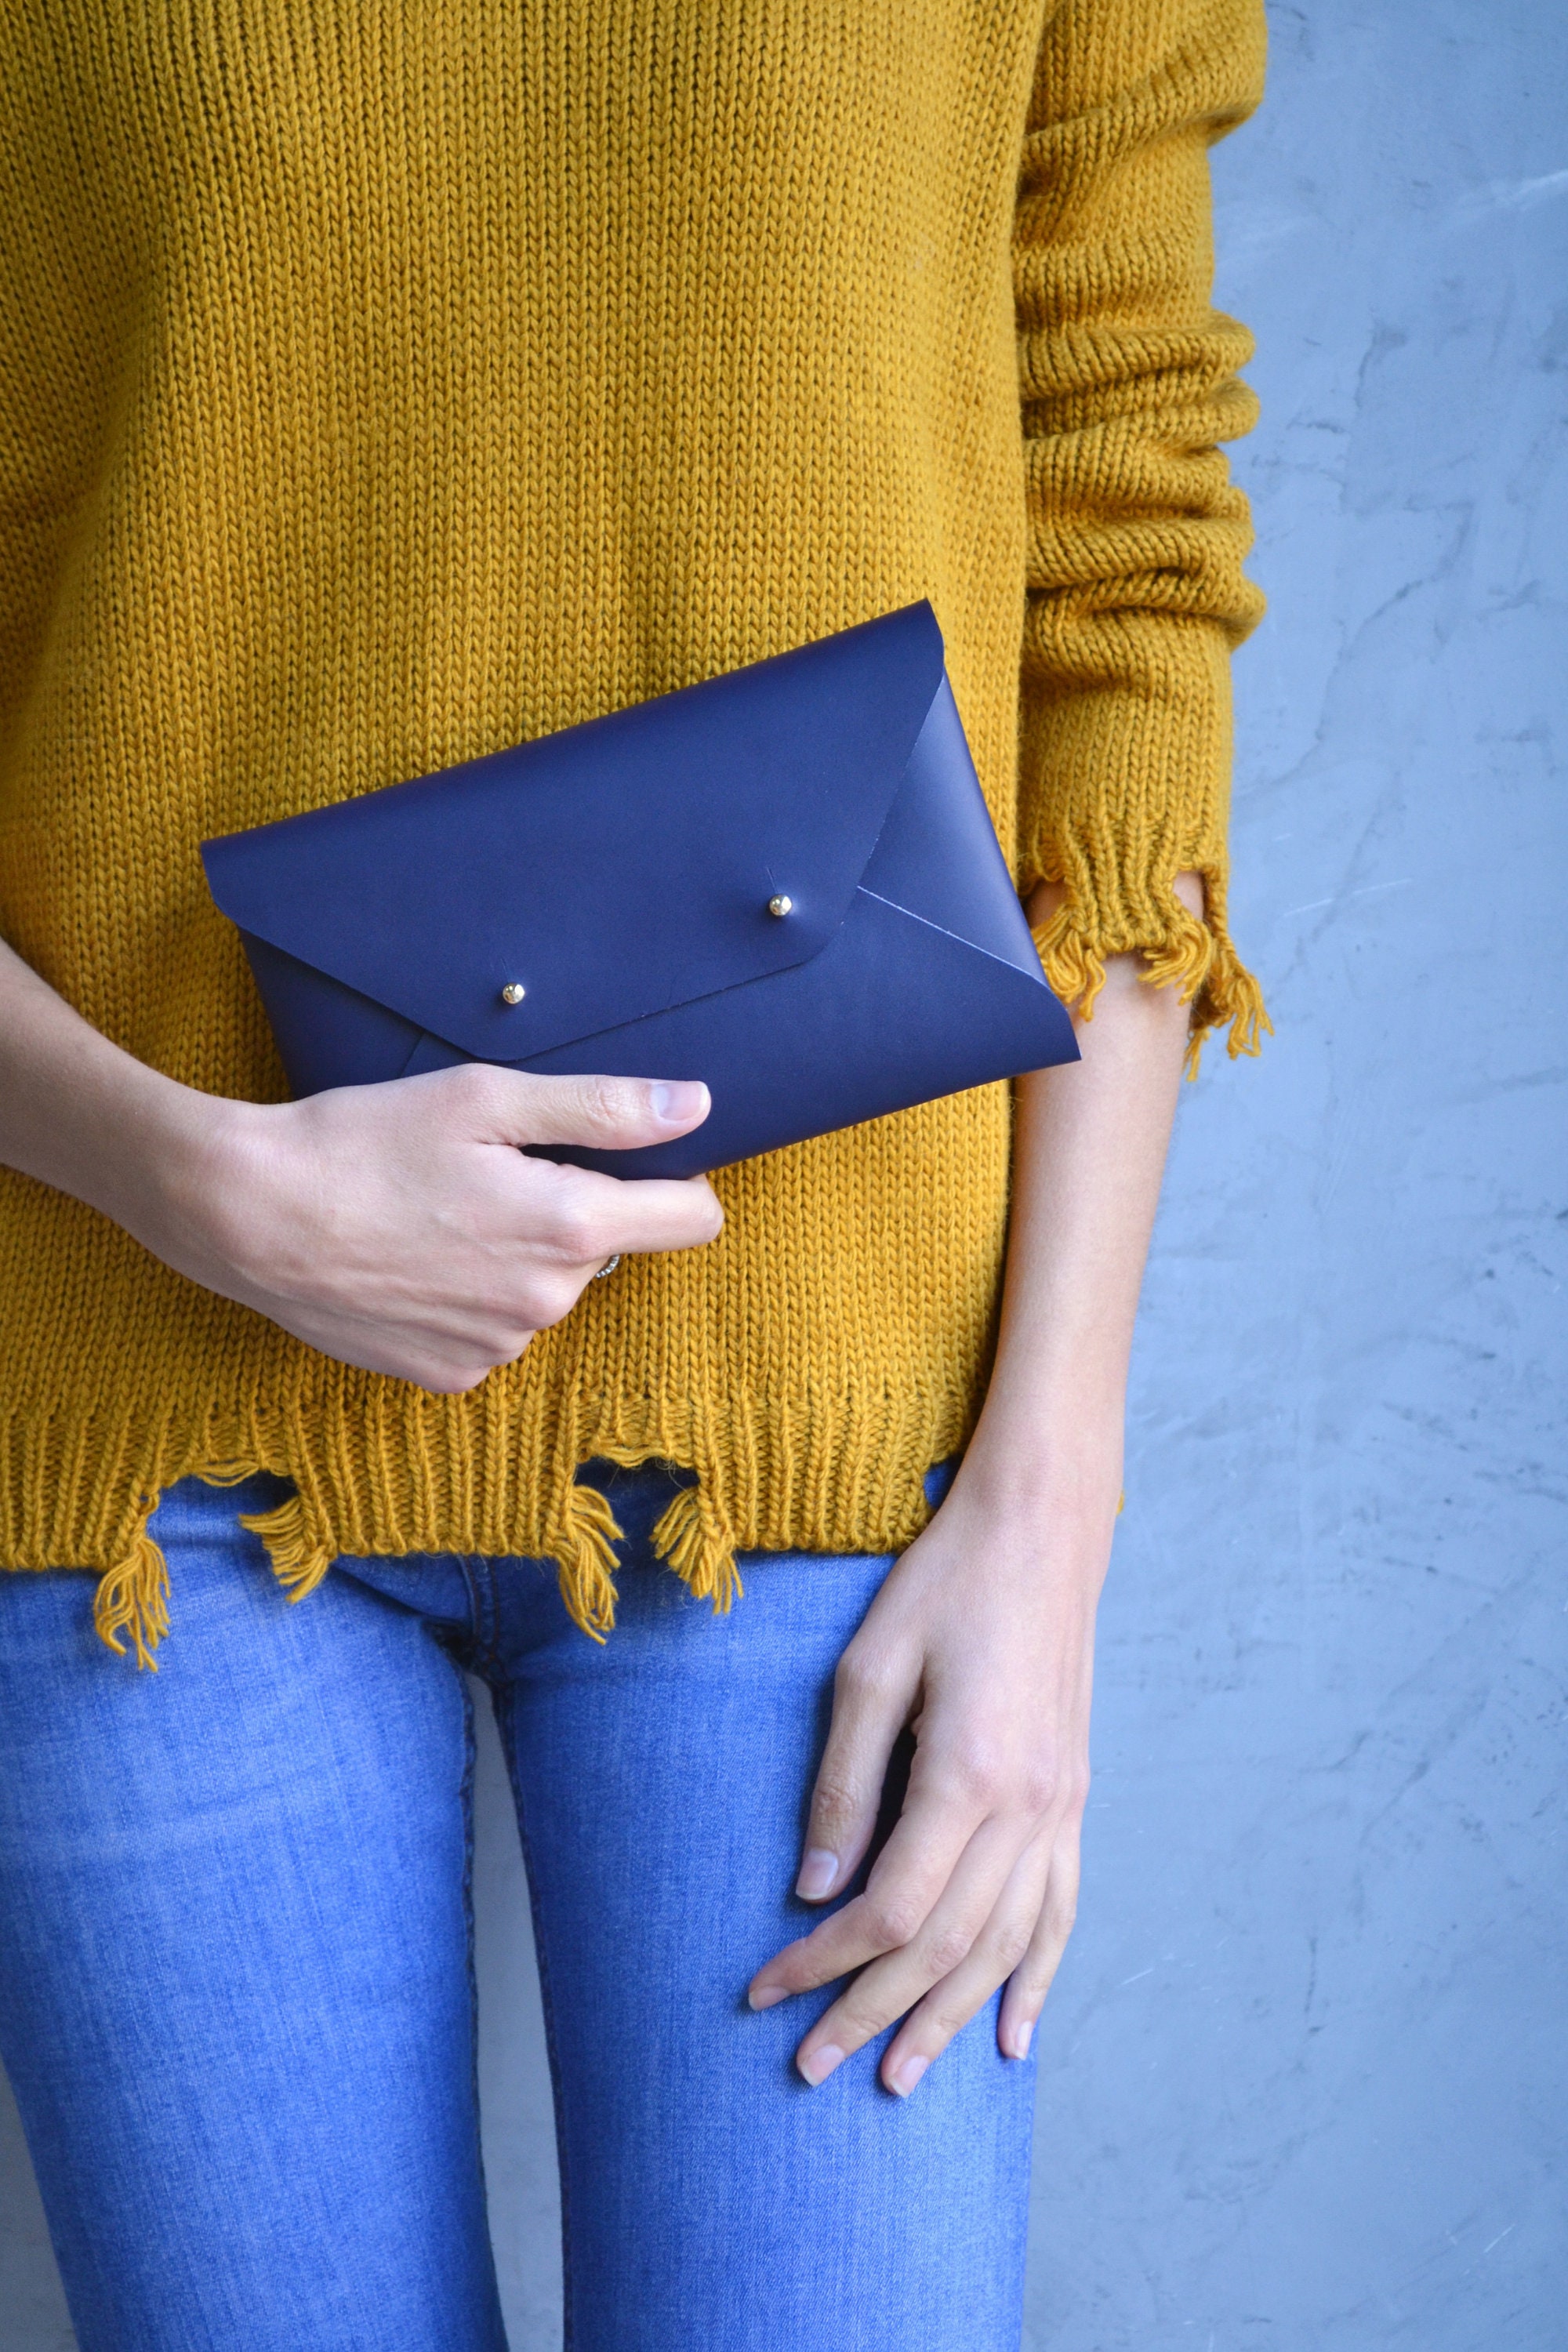 NAVY BLUE & YELLOW faux suede  clutch bag Handmade in the UK BN lined